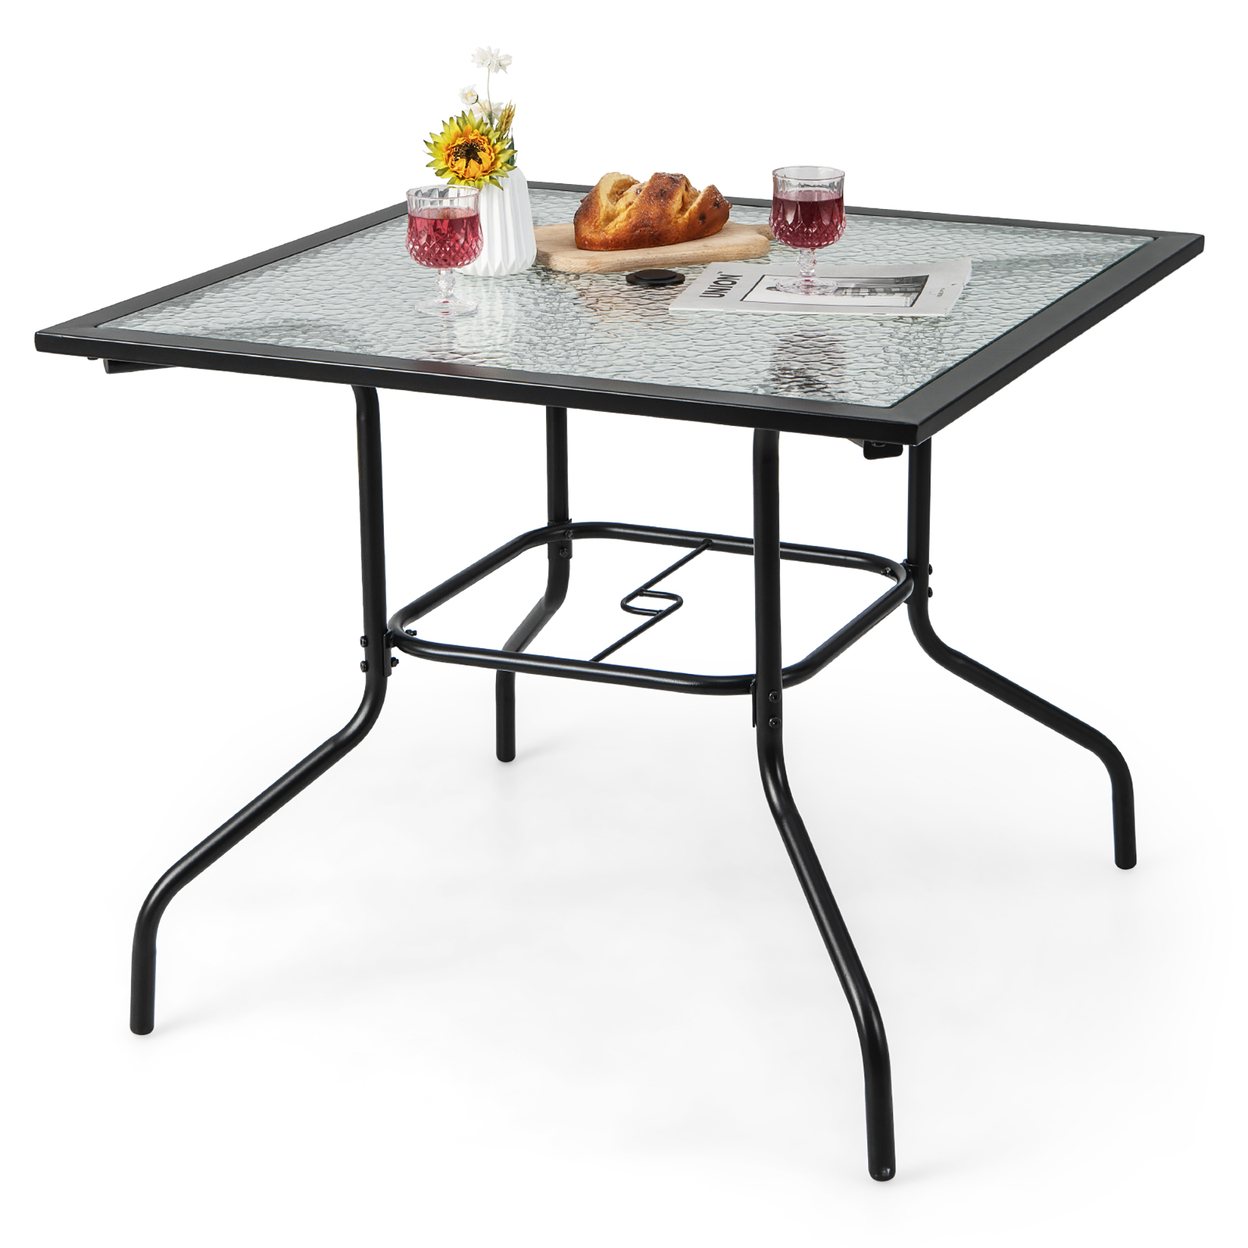 35'' Patio Dining Table Square Outdoor Dining Table W/ Tempered Glass Tabletop Black